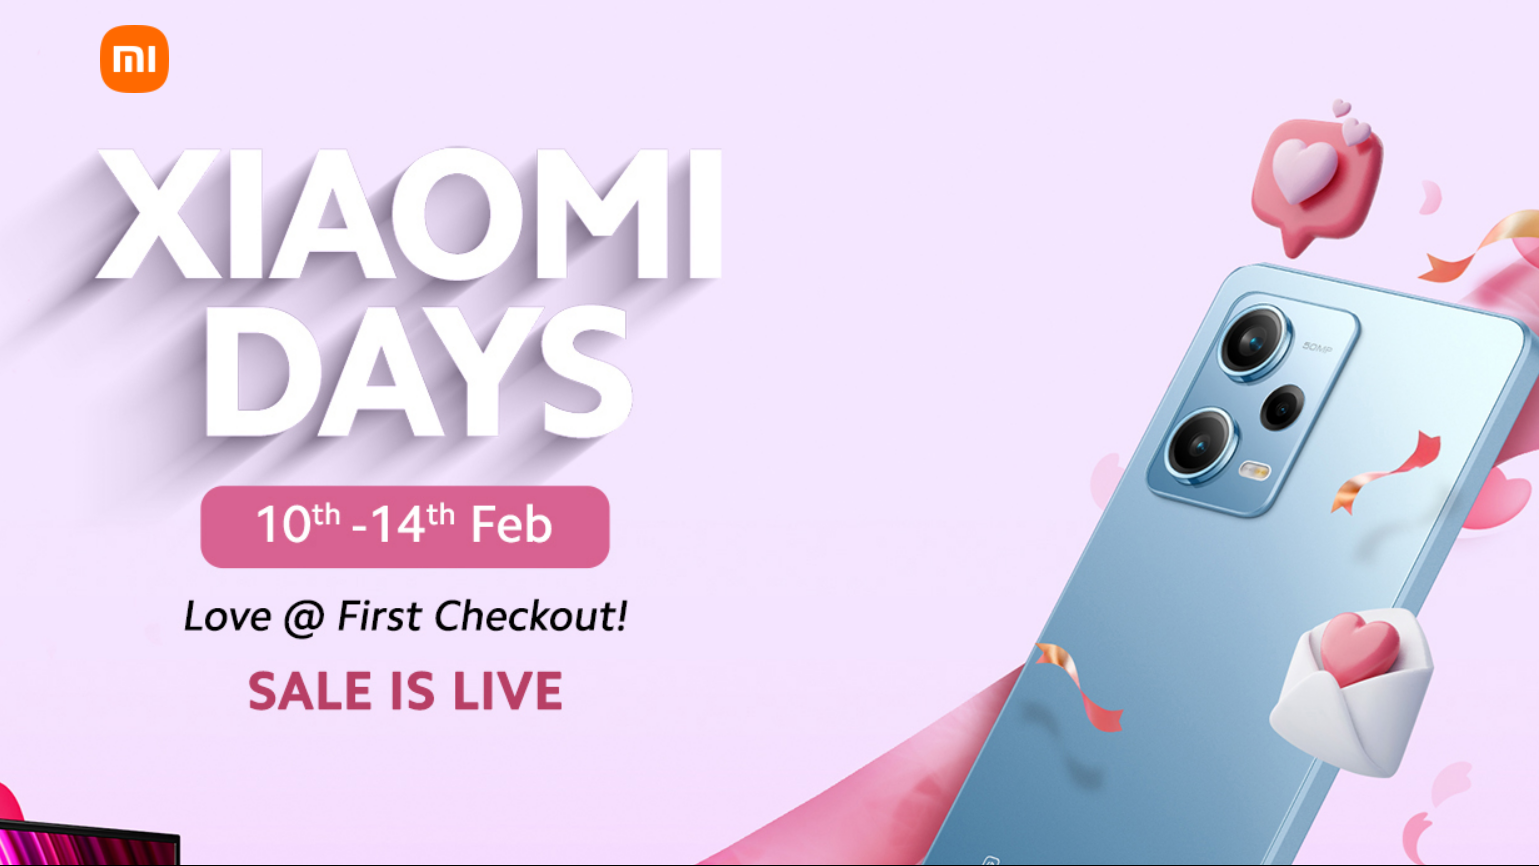 Xiaomi celebrates Valentine’s Day: Exciting Offers on Smartphones, Smart TVs, Laptop & Tablets and more